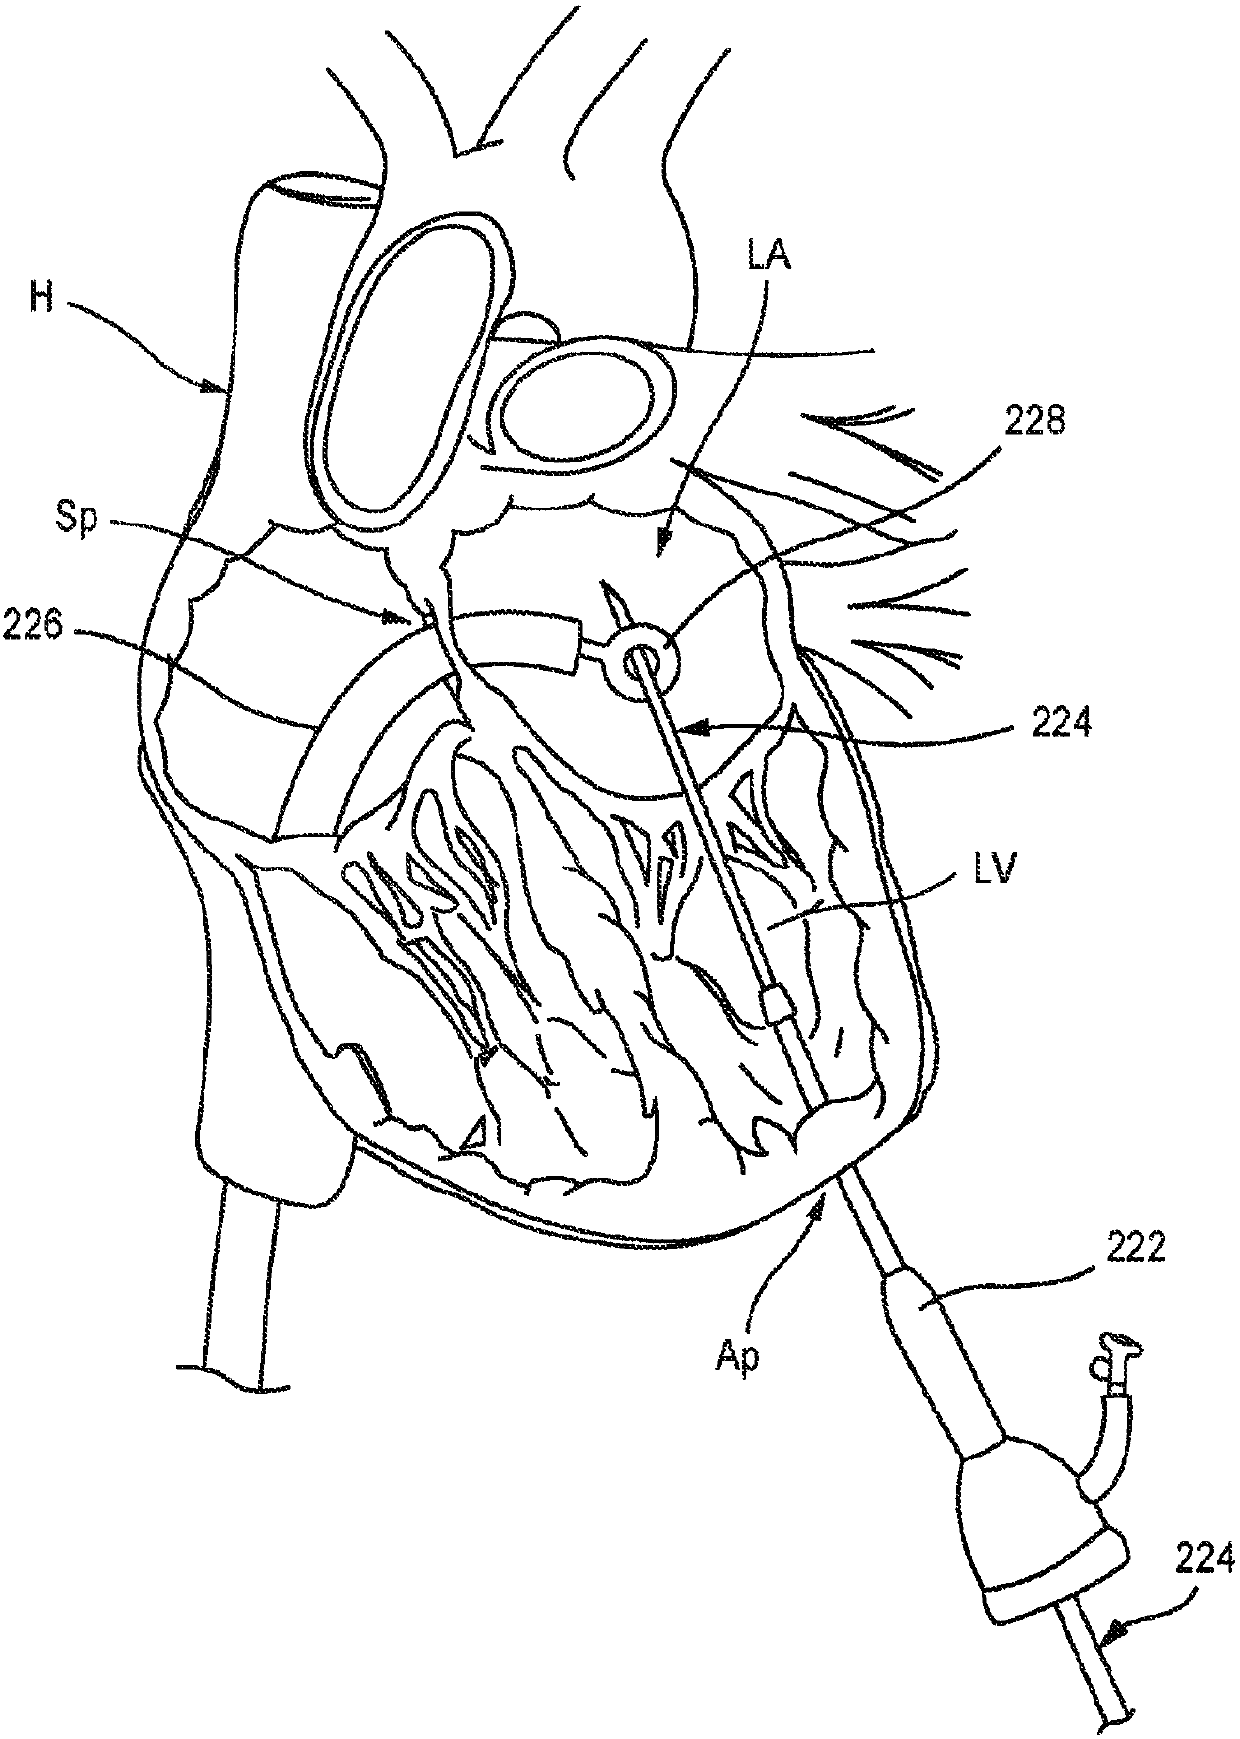 Apical control of transvascular delivery of prosthetic mitral valve